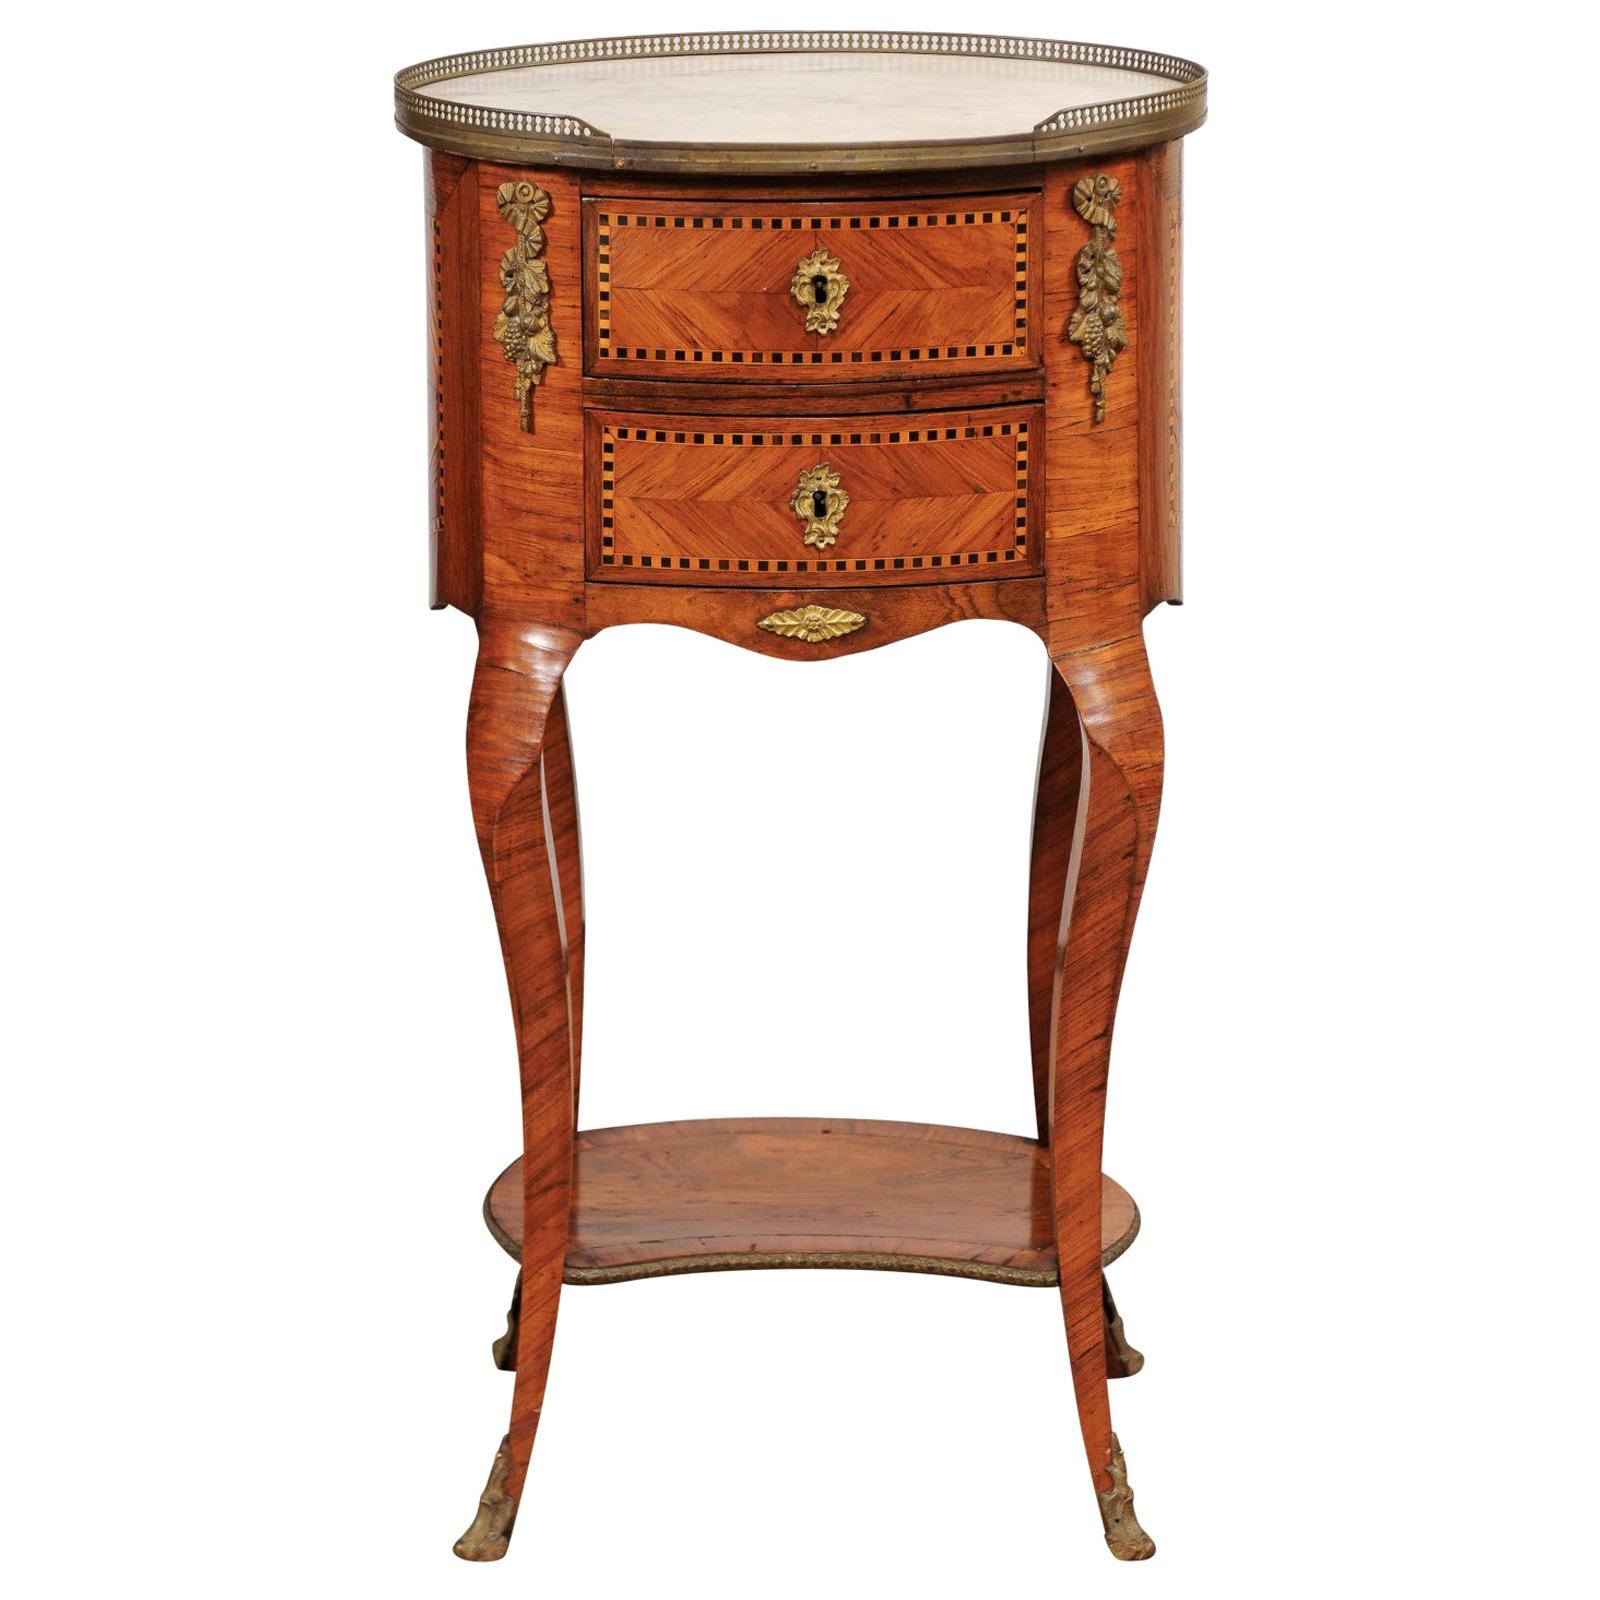 19th Century French Inlaid Tulipwood Chevet with Oval White Marble Top